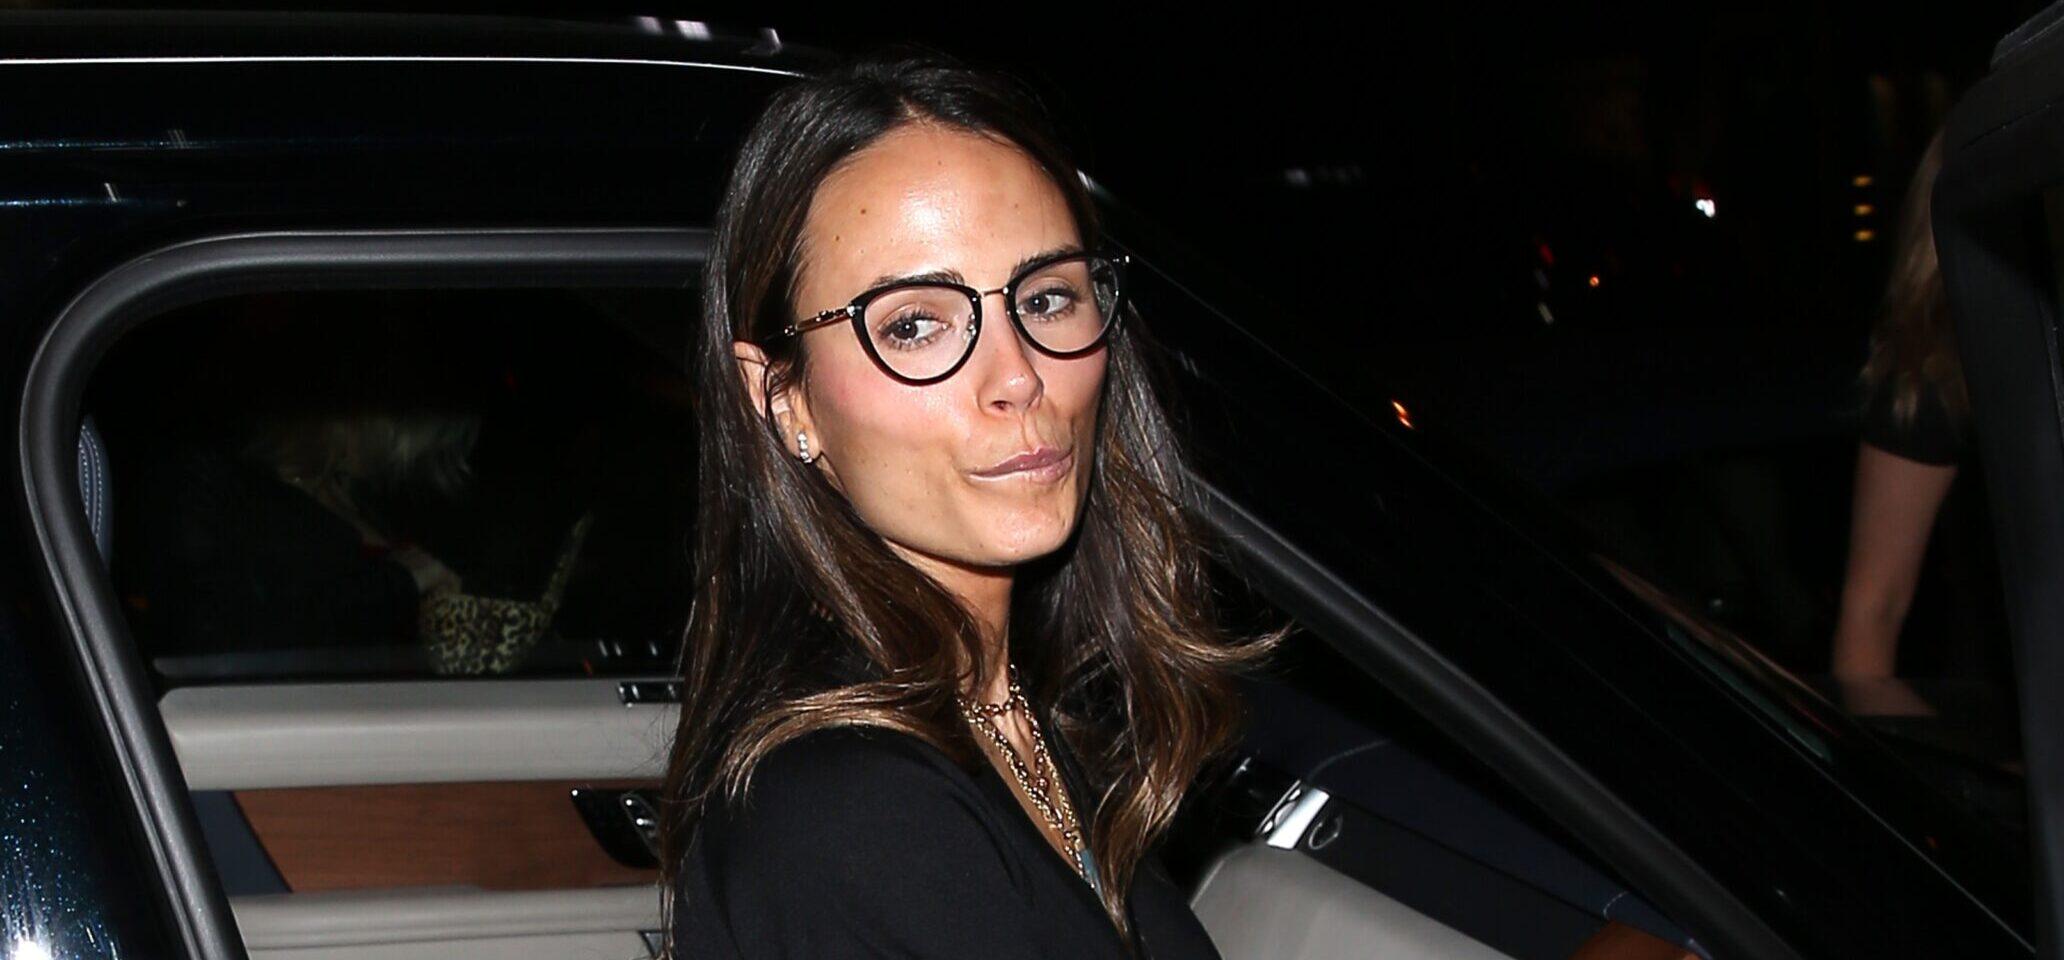 Jordana Brewster Is Asking The People In Her Life For ‘Consent’ Before Appearances